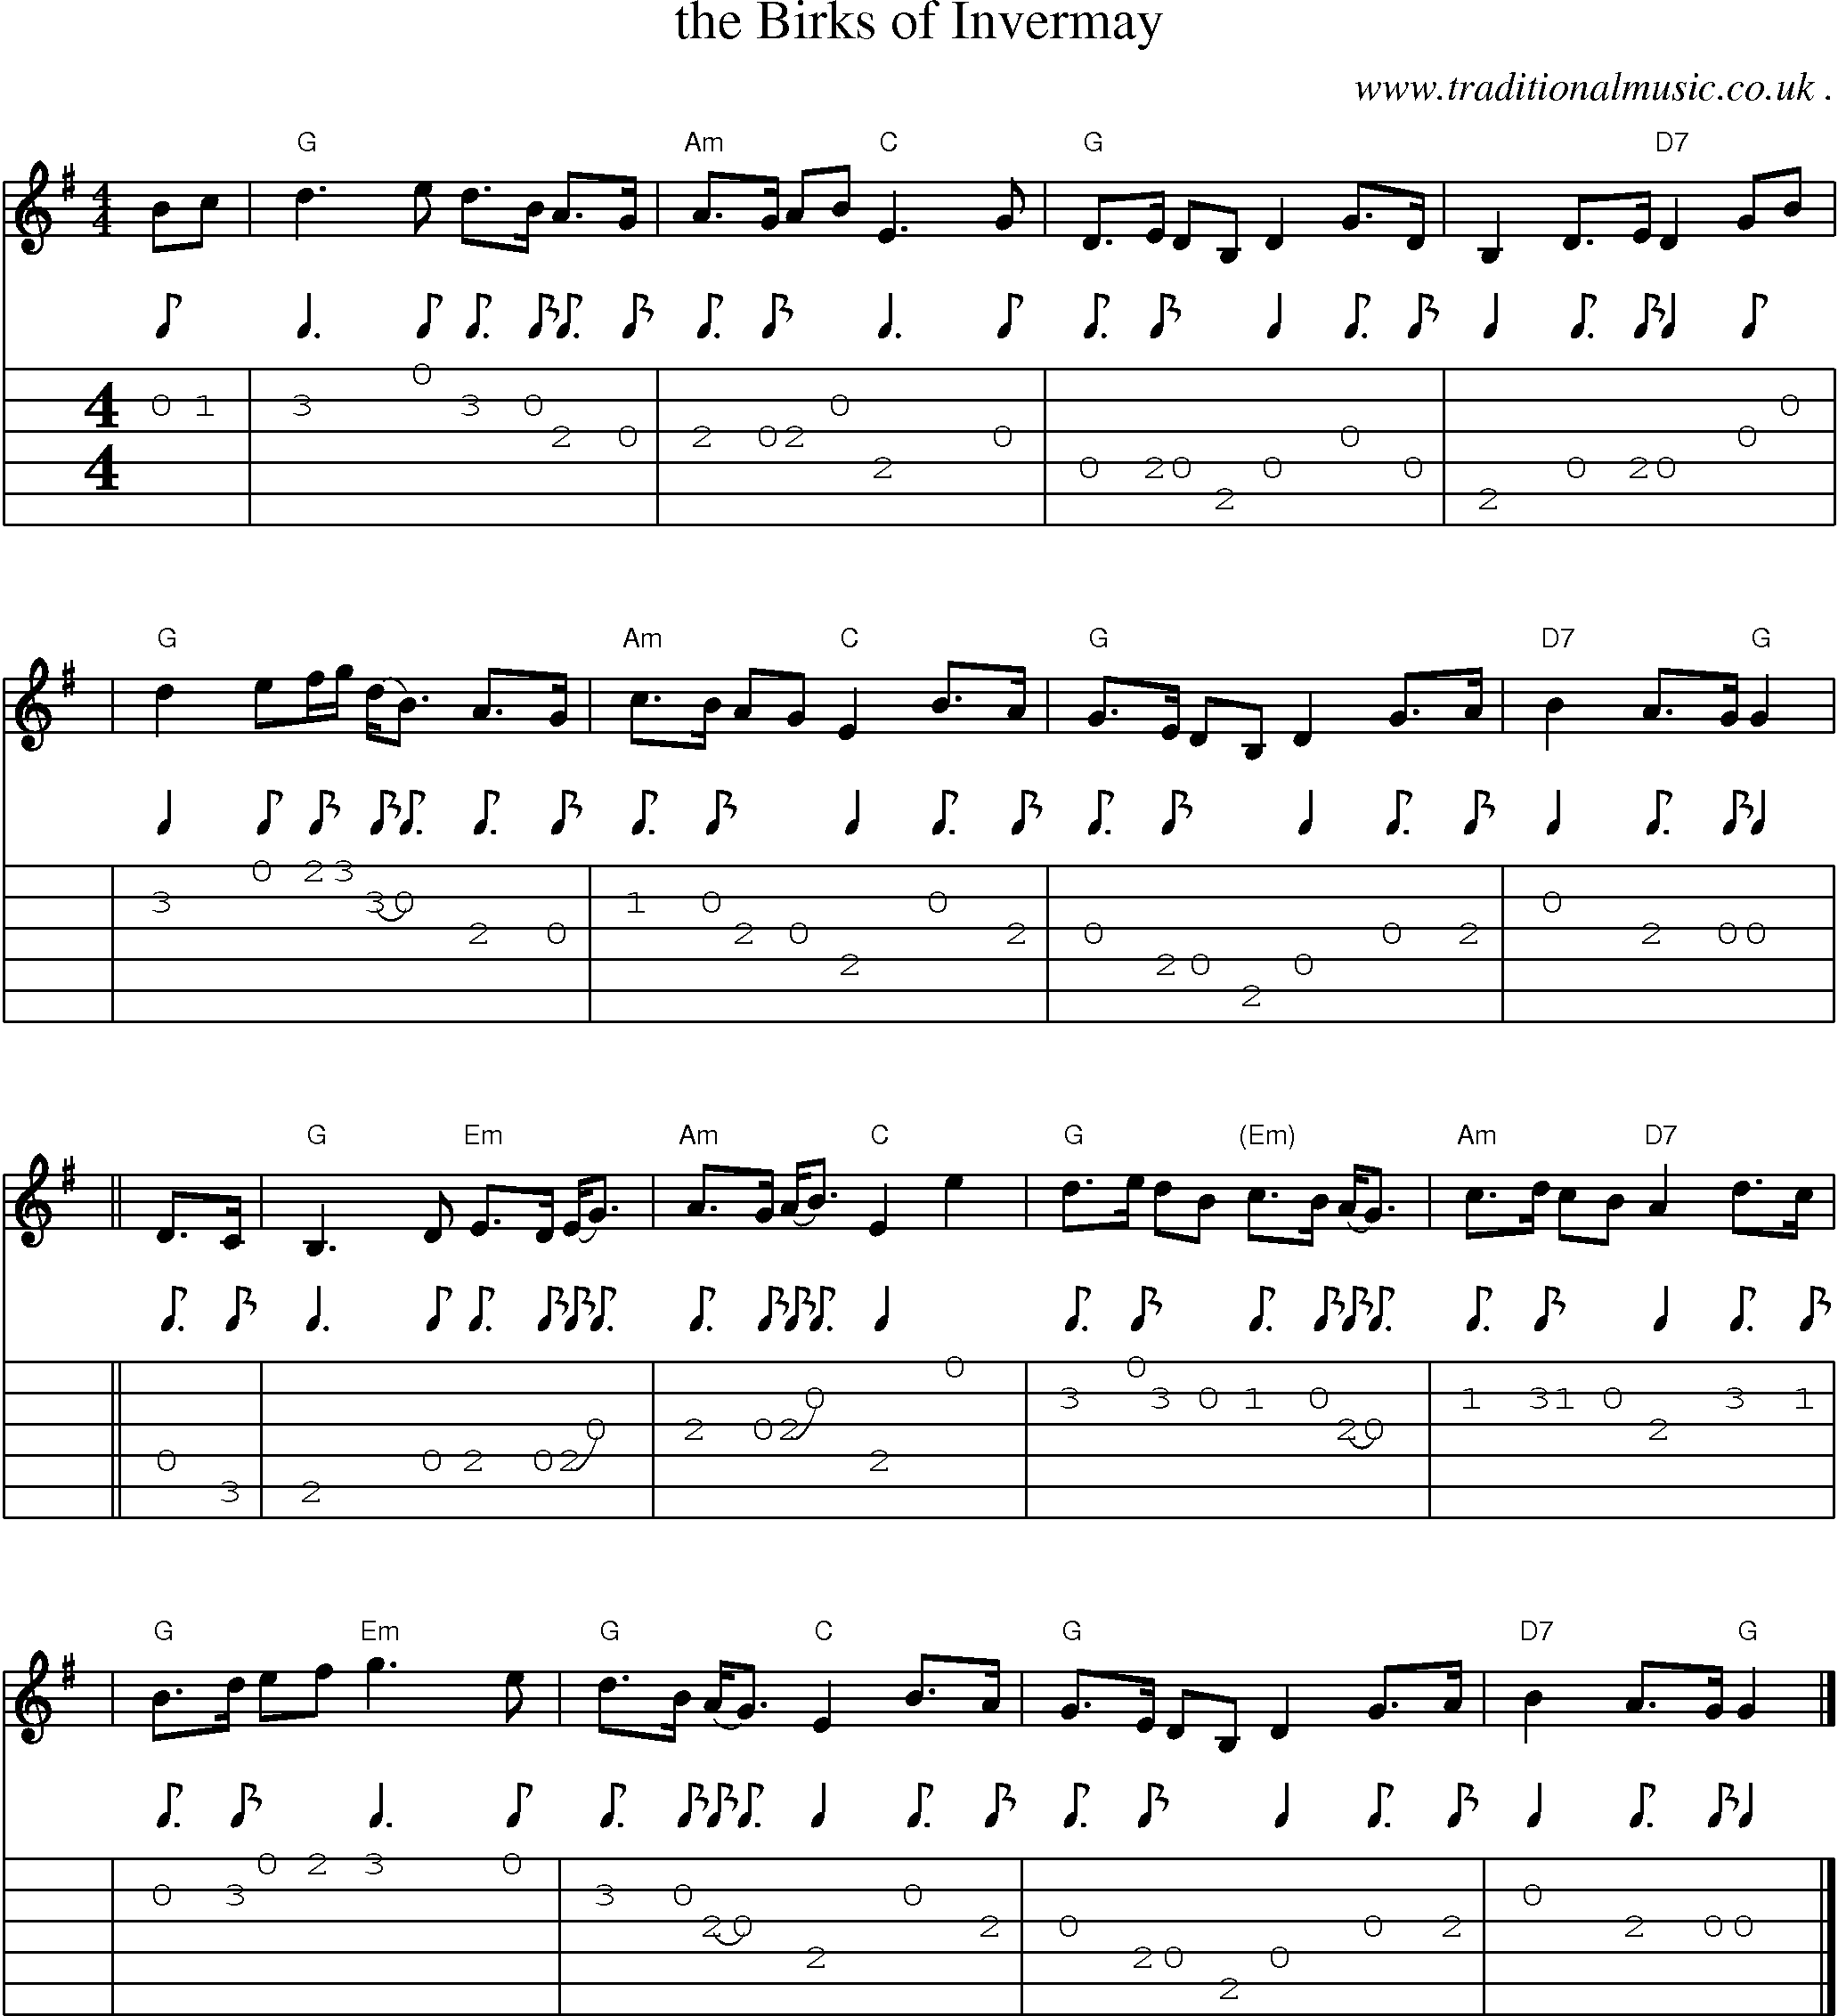 Sheet-music  score, Chords and Guitar Tabs for The Birks Of Invermay